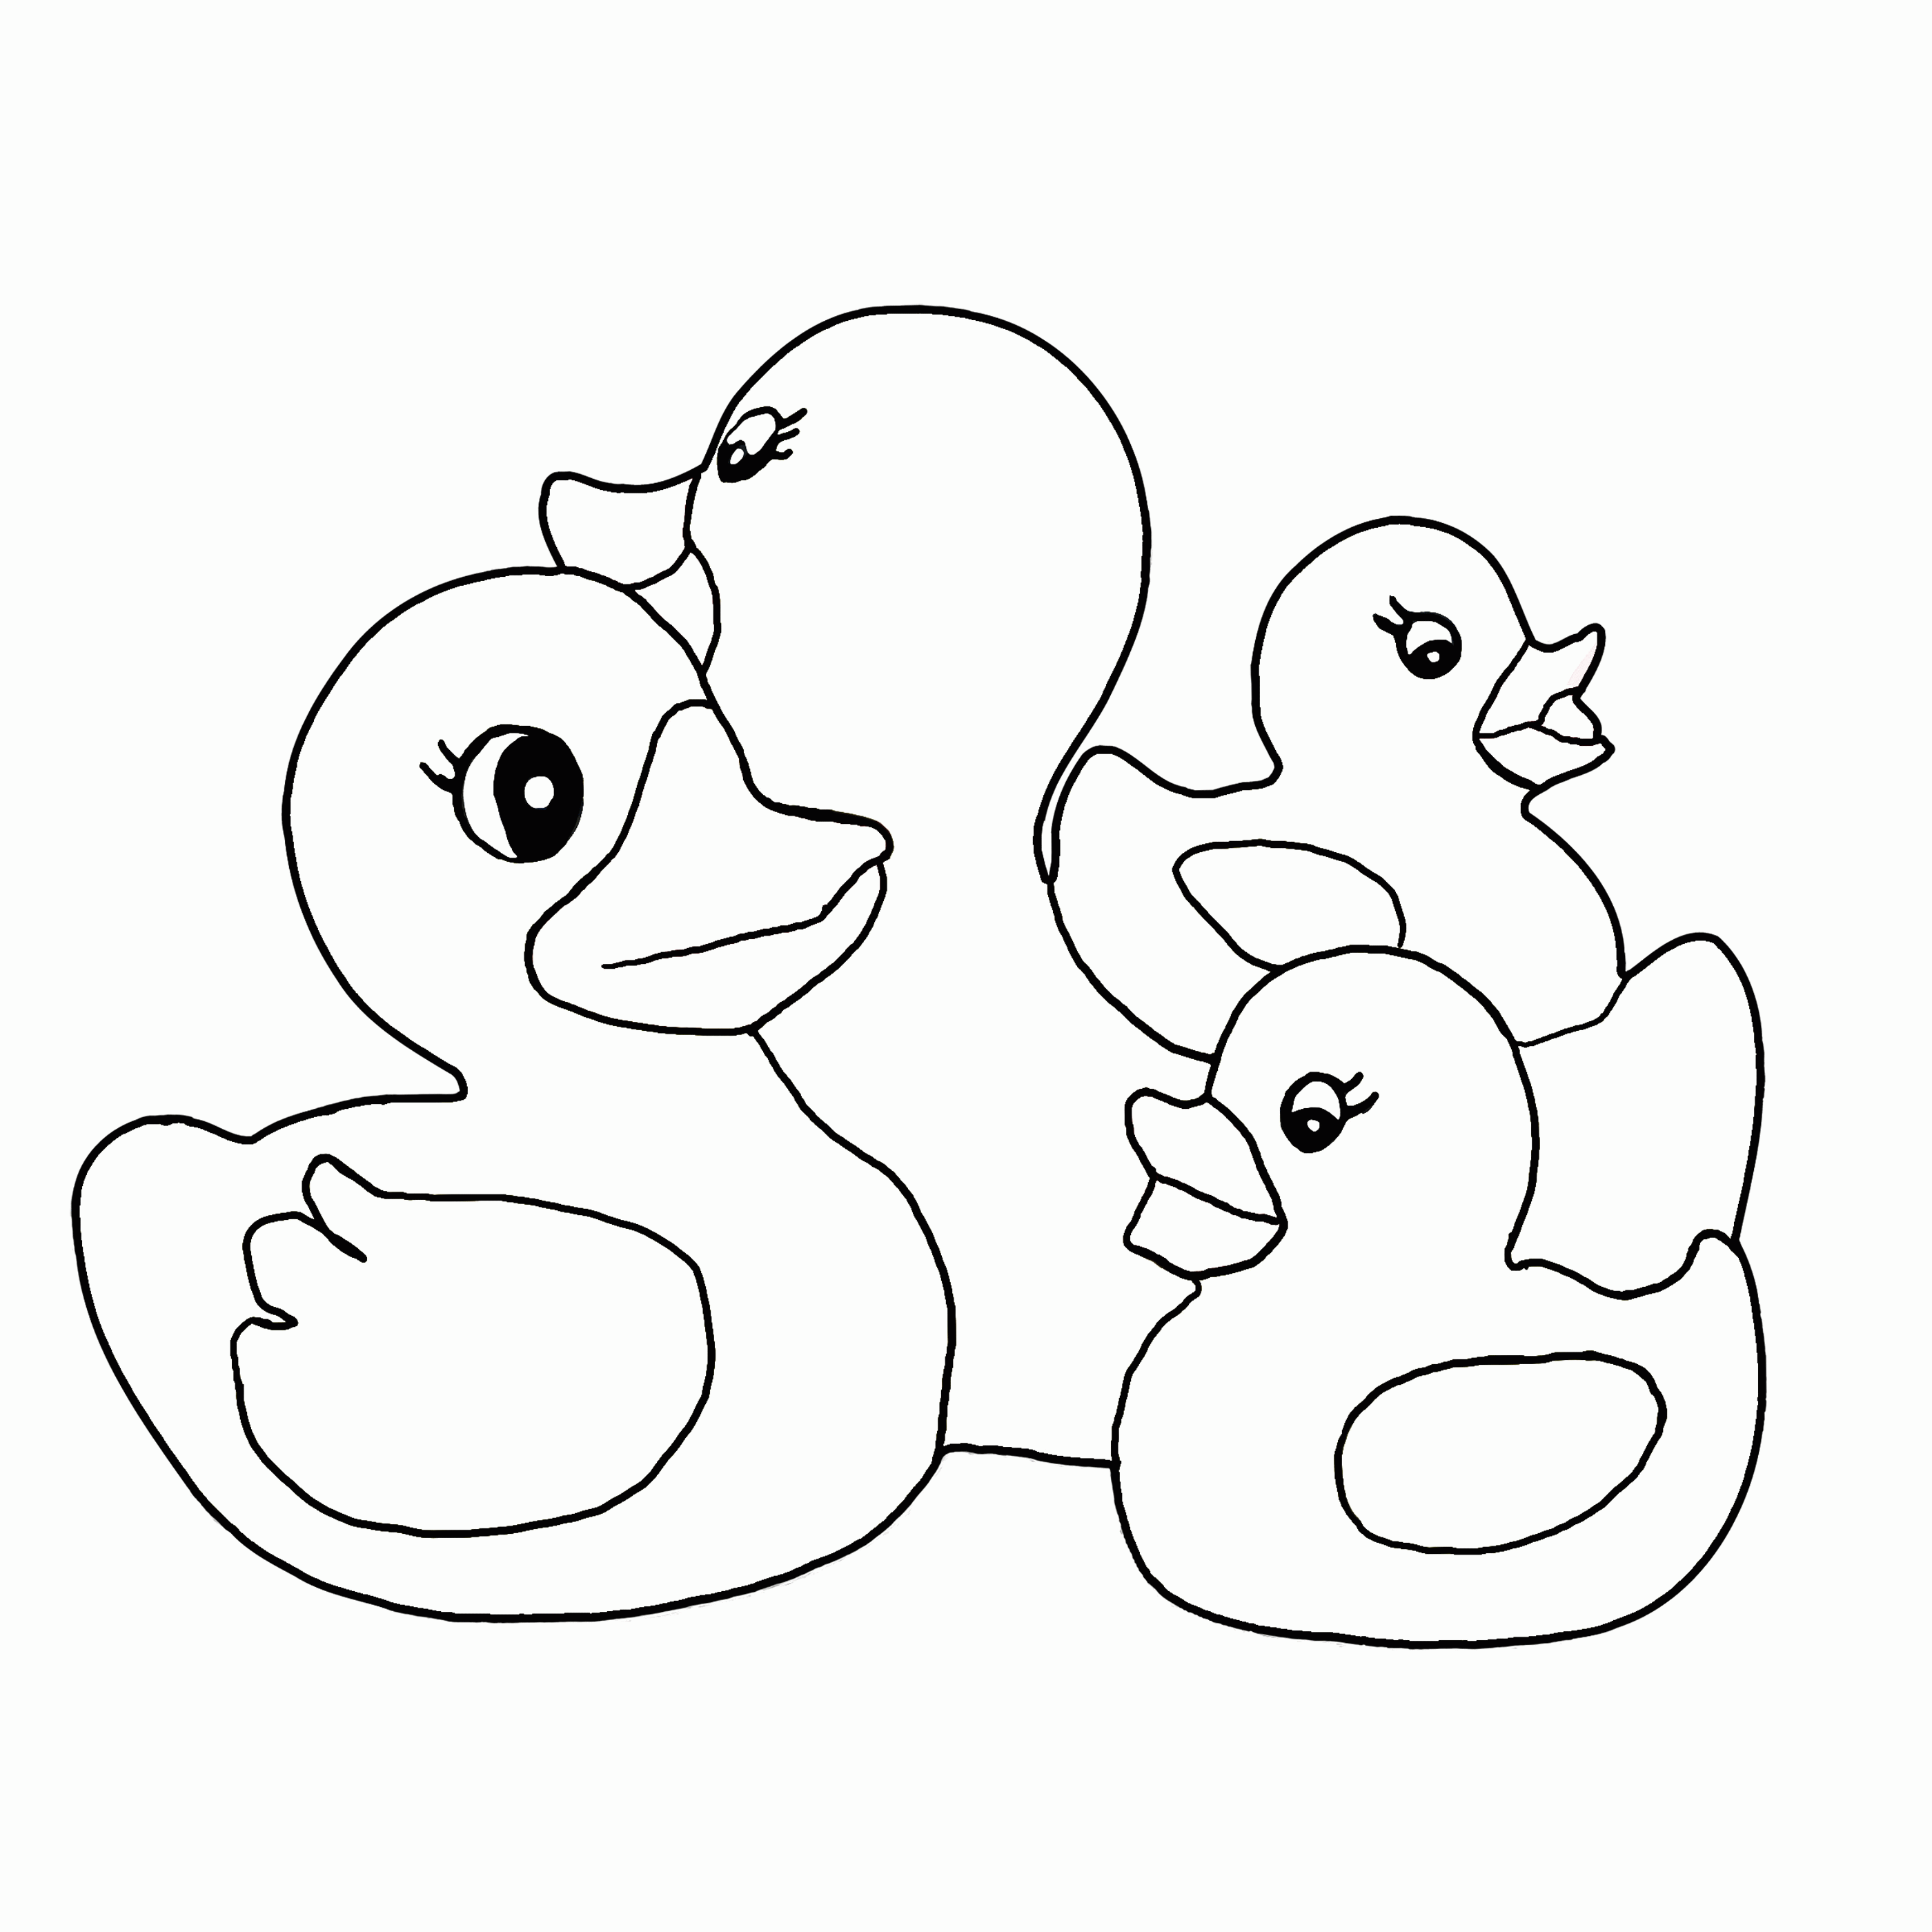 Ducks Coloring Pages Printable - Coloring Page